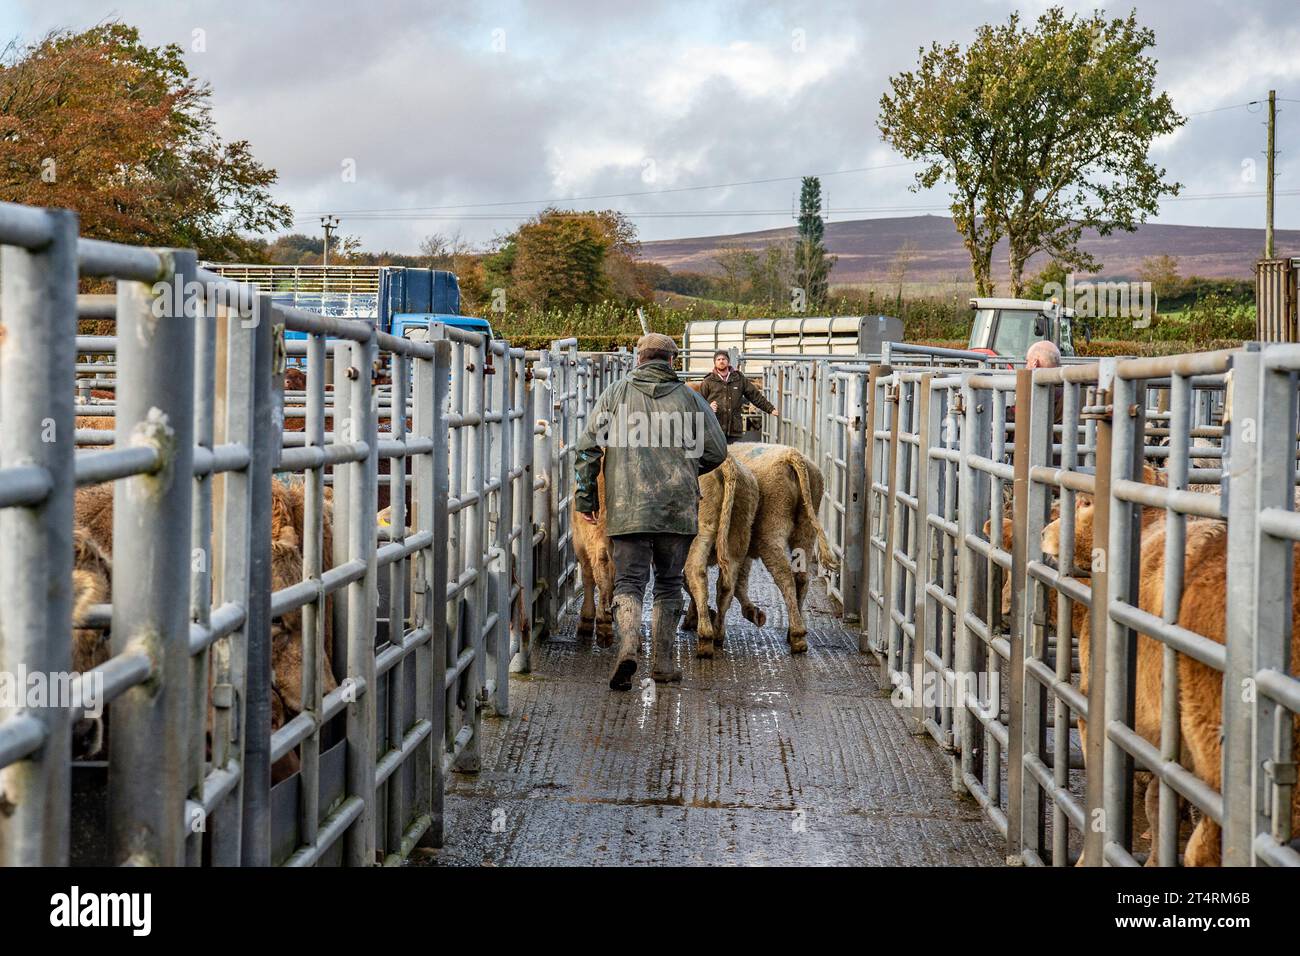 loading cattle at cattle market Stock Photo